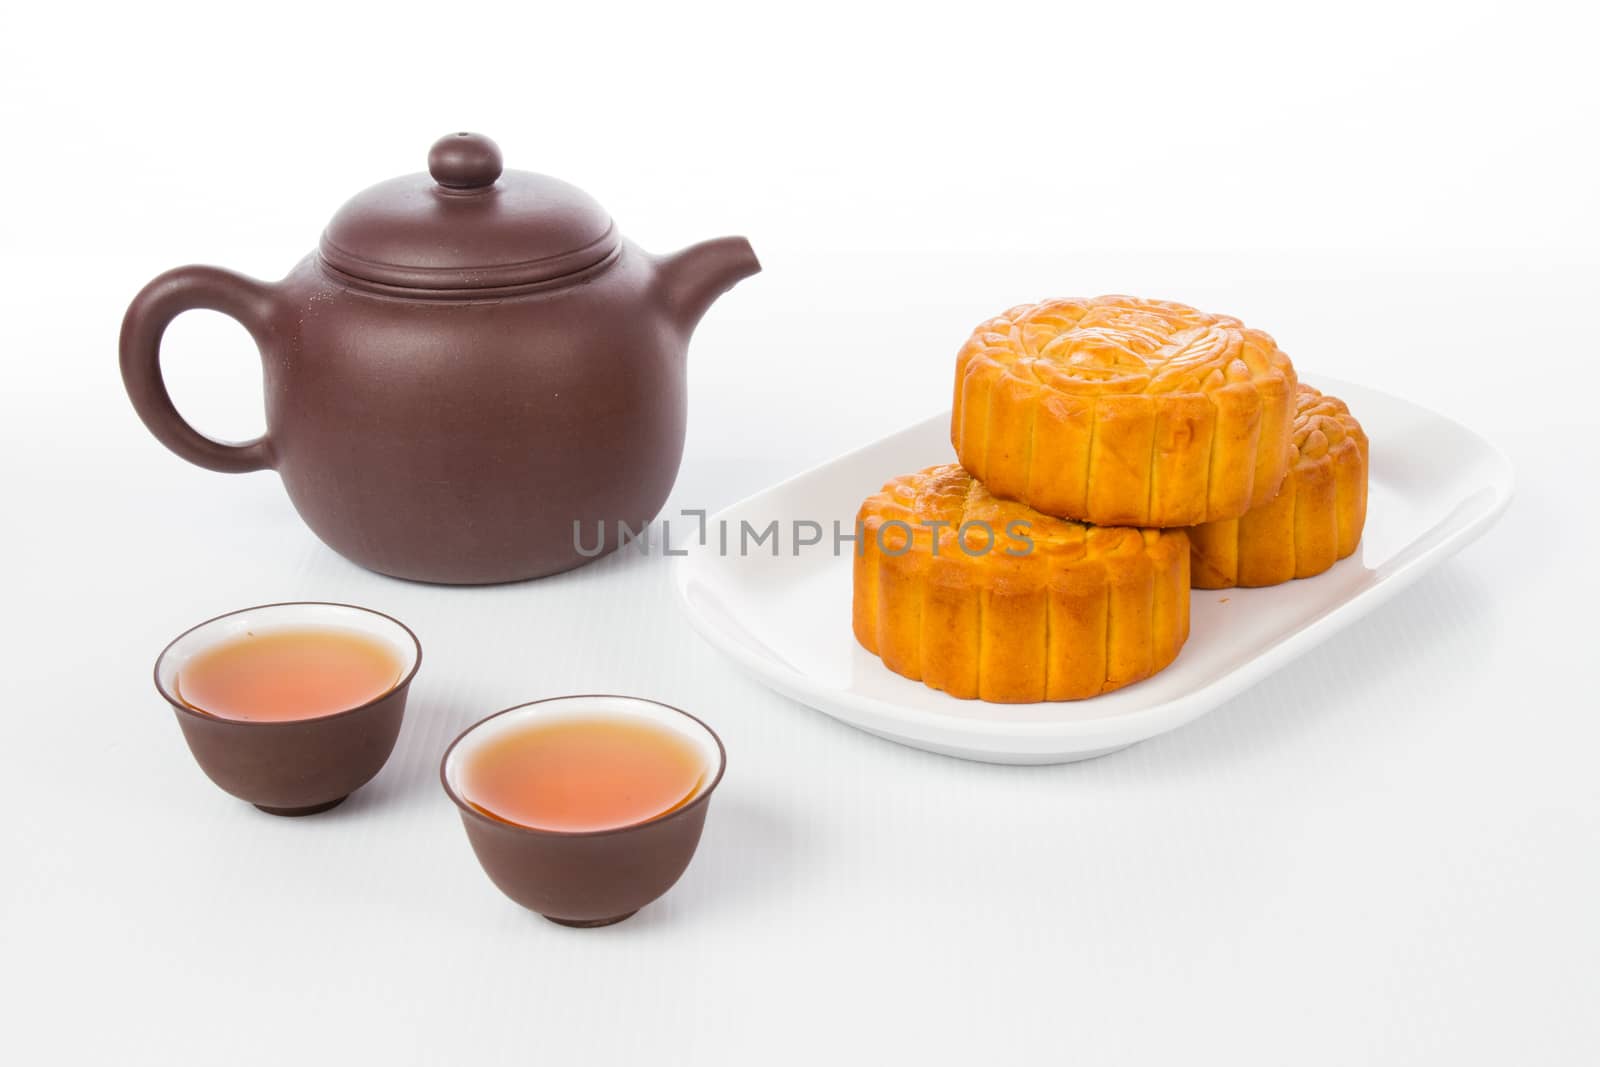 Chinese mid autumn festival with moon cake and tea pot setup in plain white background.